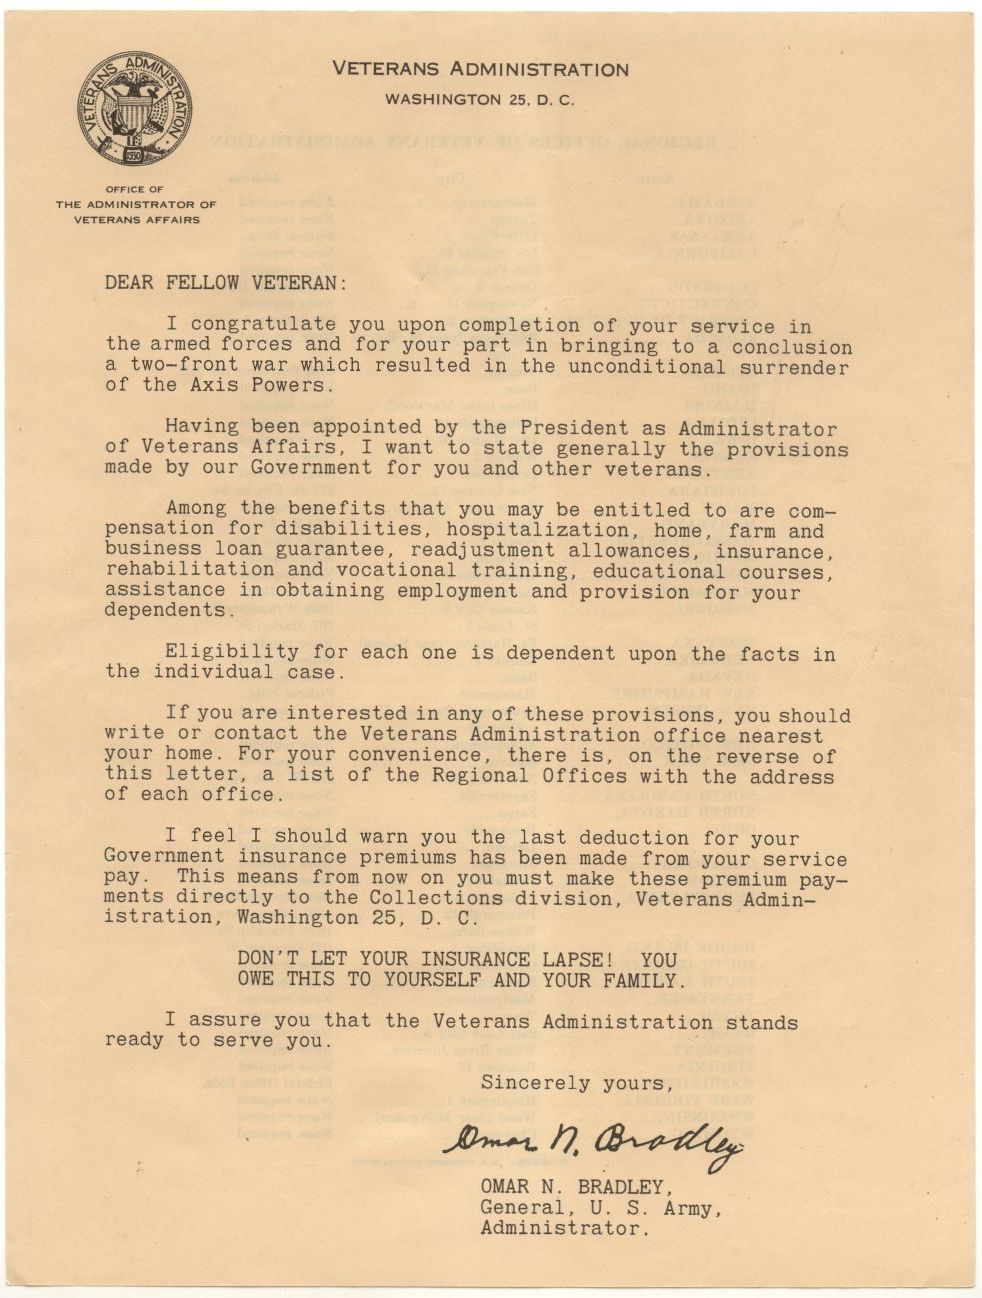 This form letter is from Gen. Omar Bradley. A famous senior Army field commander (D Day), at one point during WWII Bradley commanded 1.3 million men.  After the war he headed the Veterans Administration and later became Chief of Staff of the Army. 